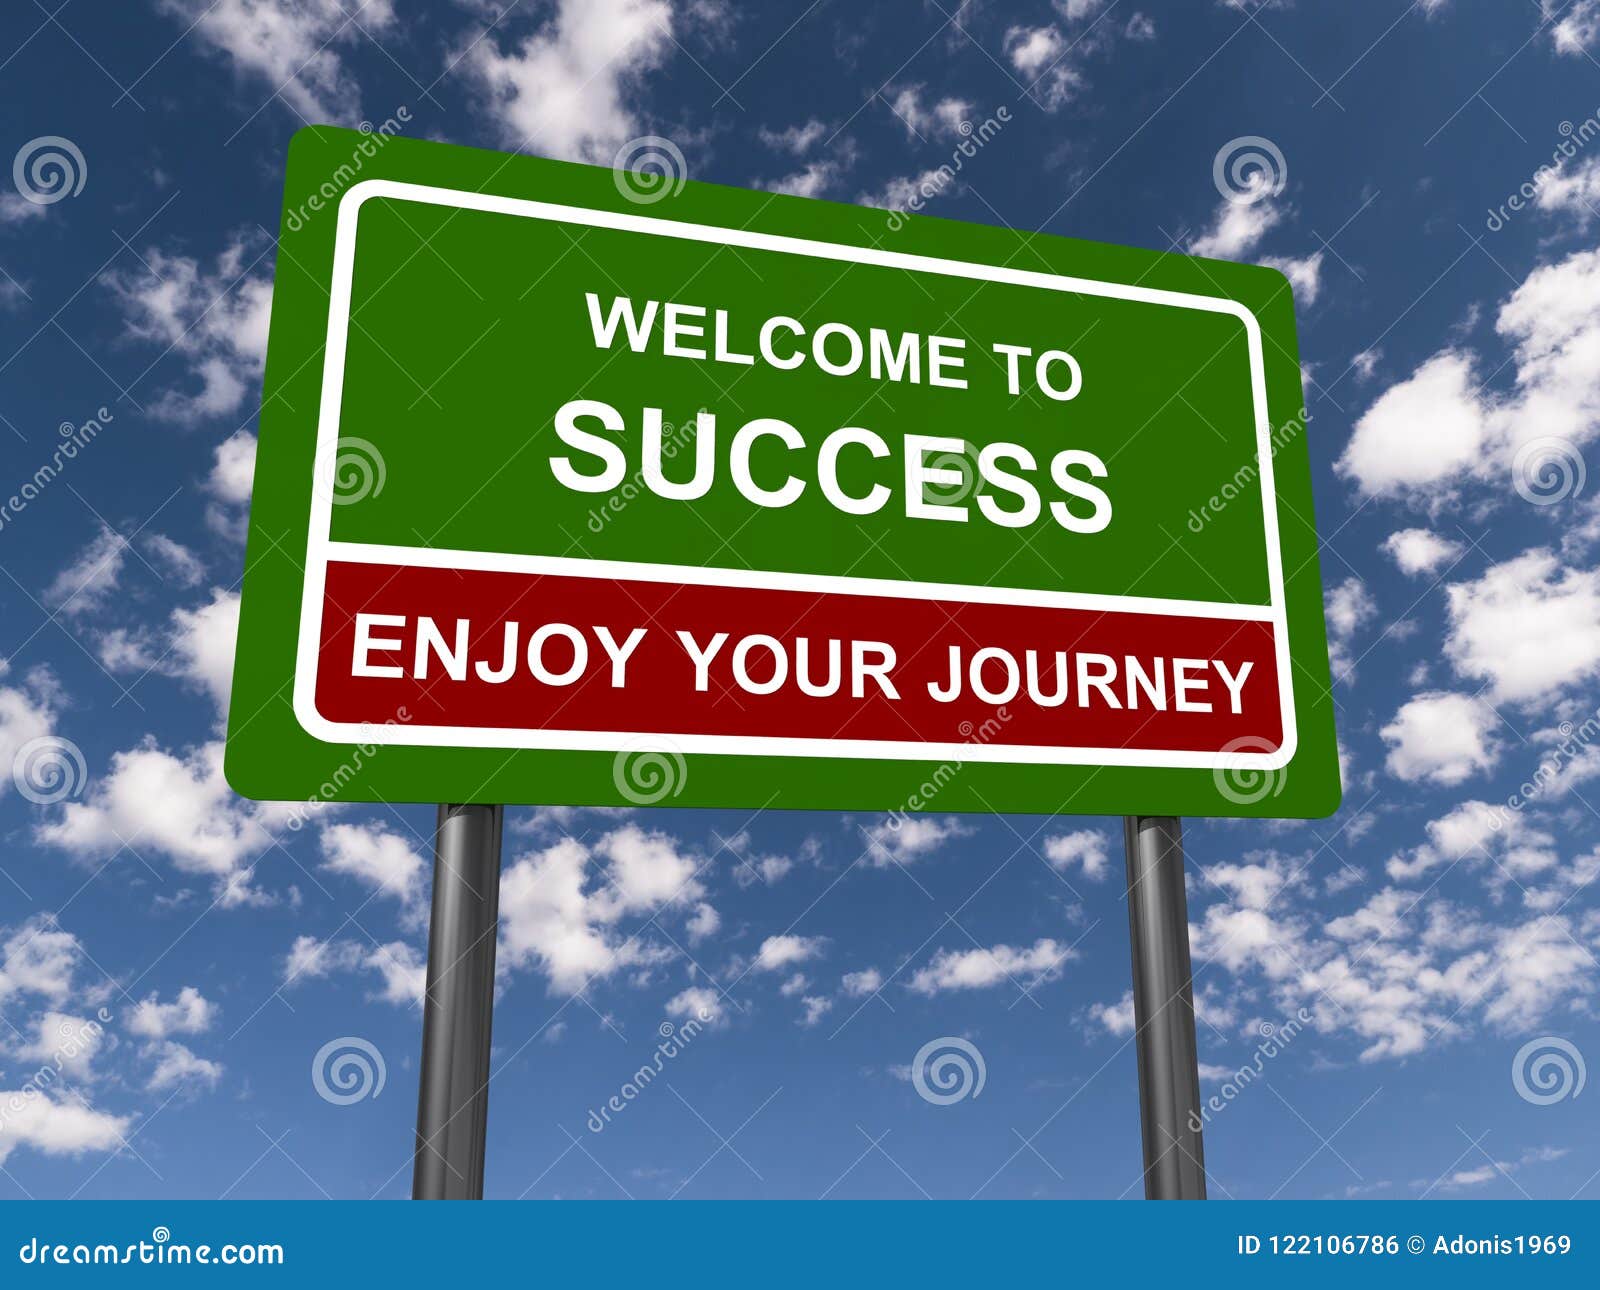 enjoy the journey to success